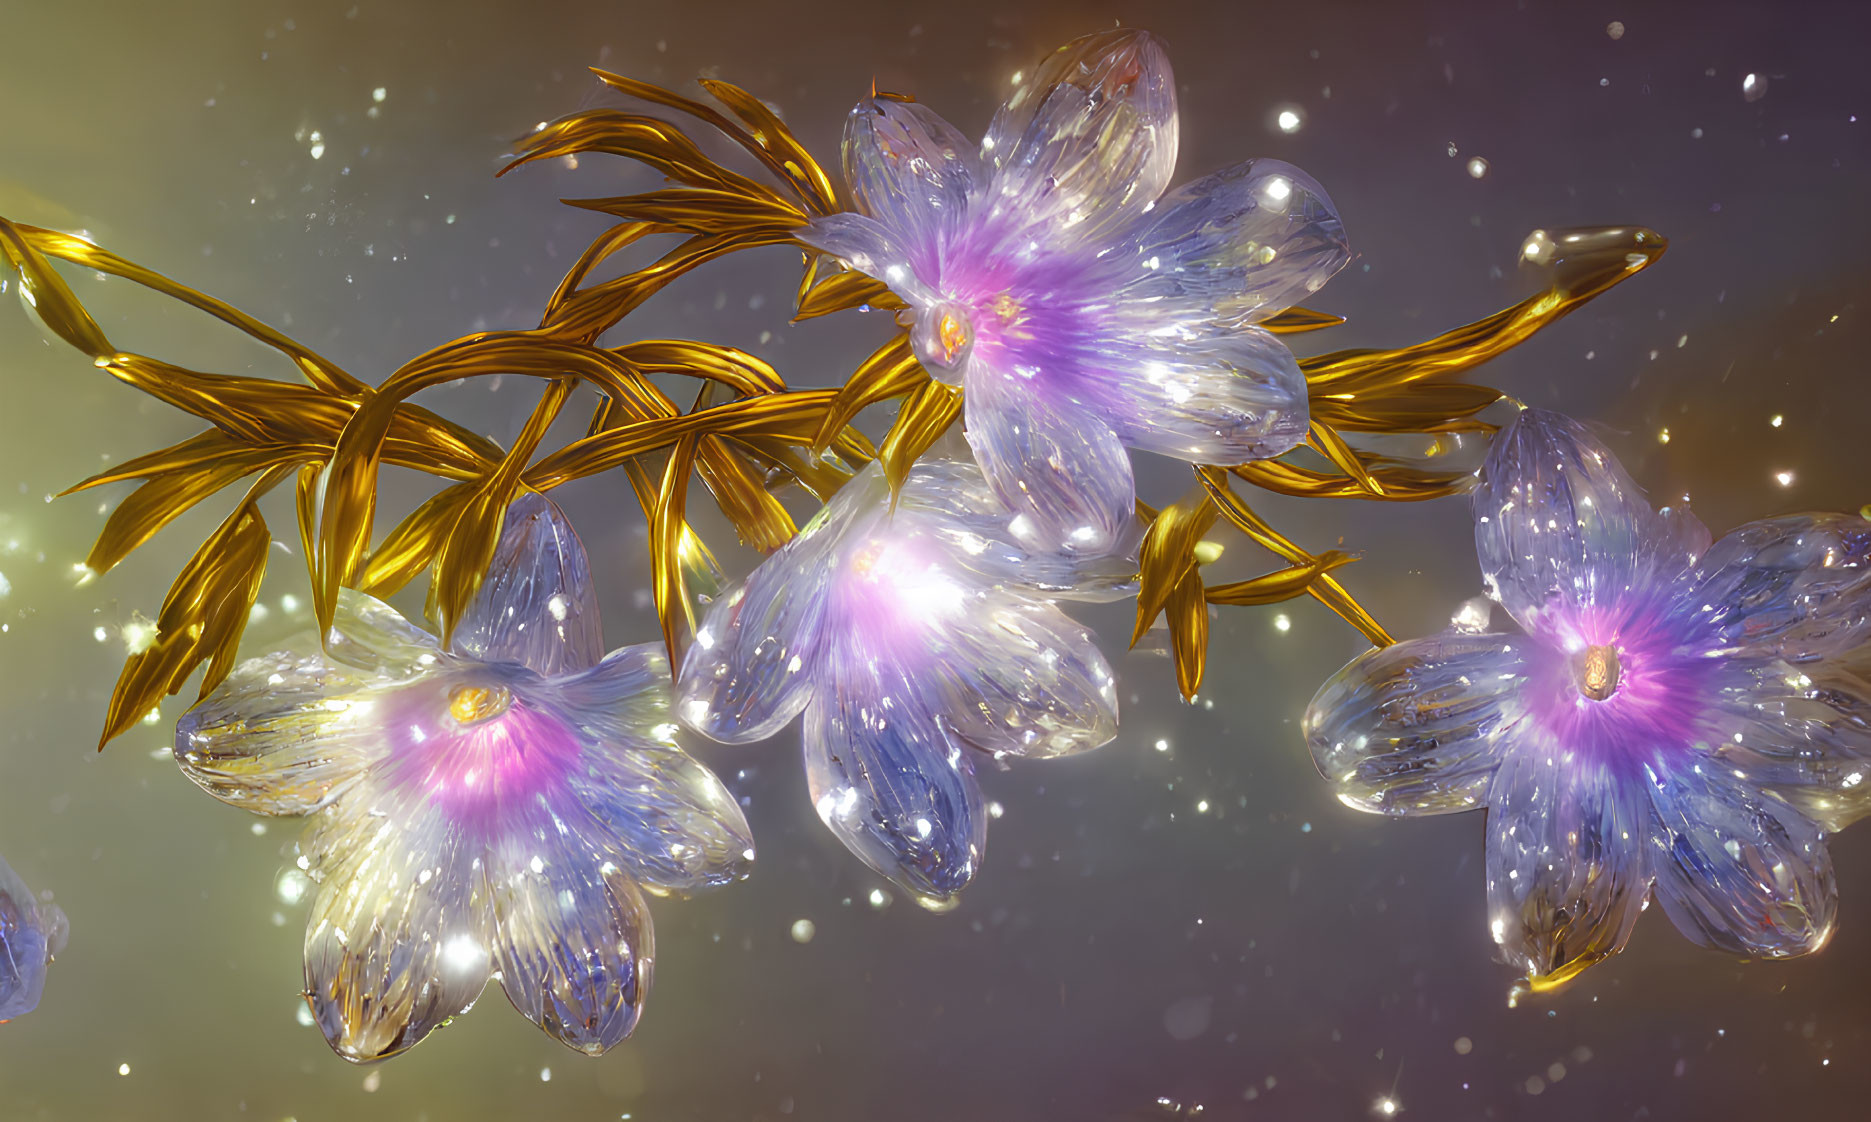 Translucent glowing flowers with golden stems on amber background